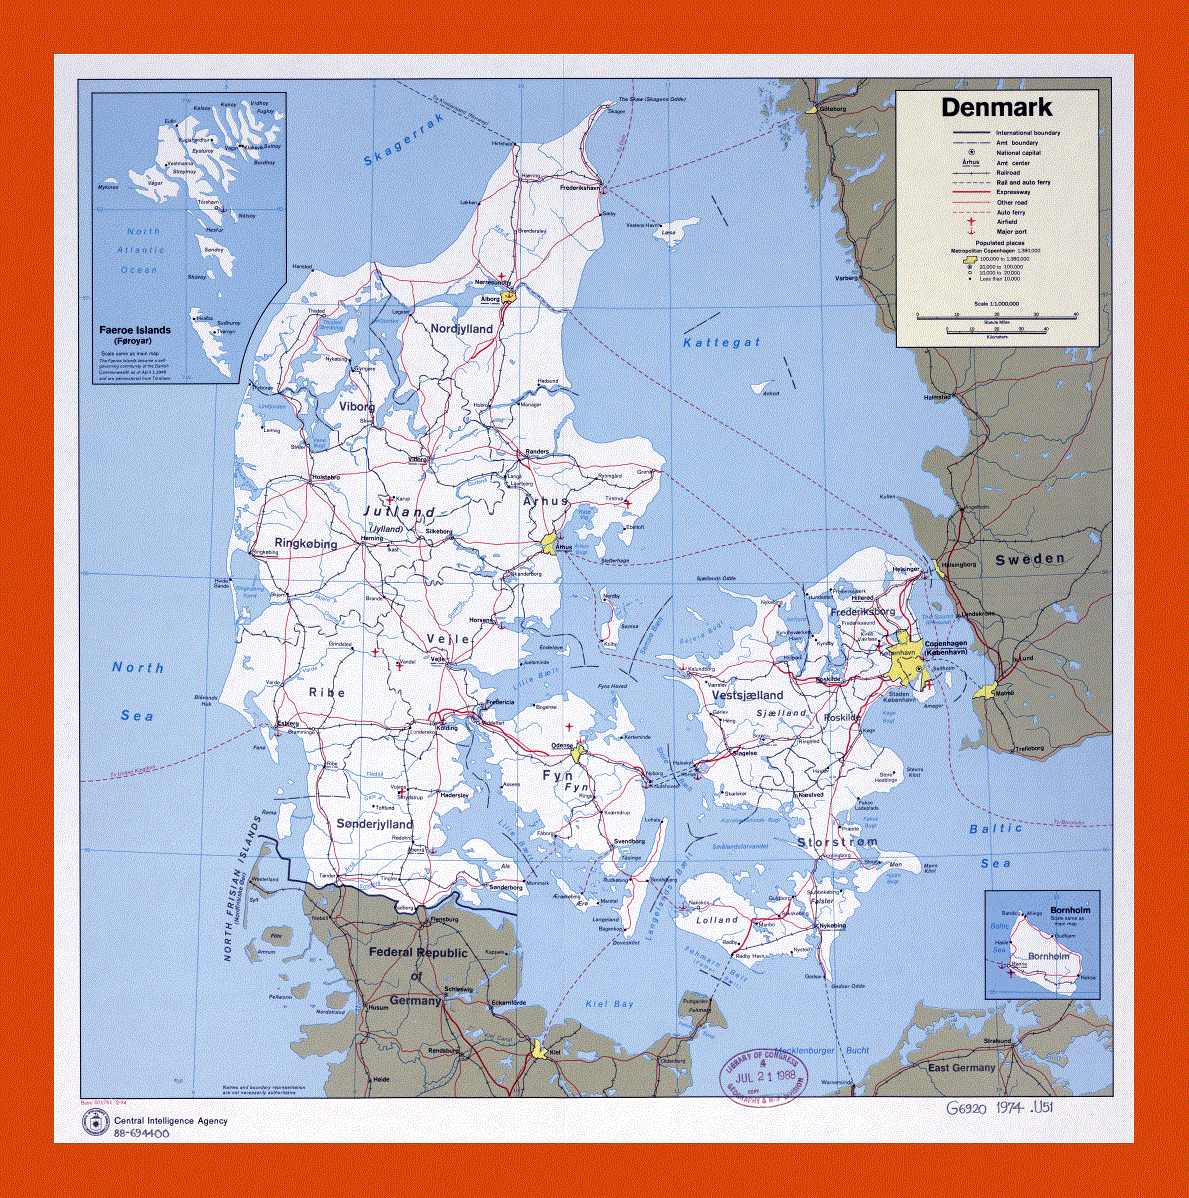 Political and administrative map of Denmark - 1974